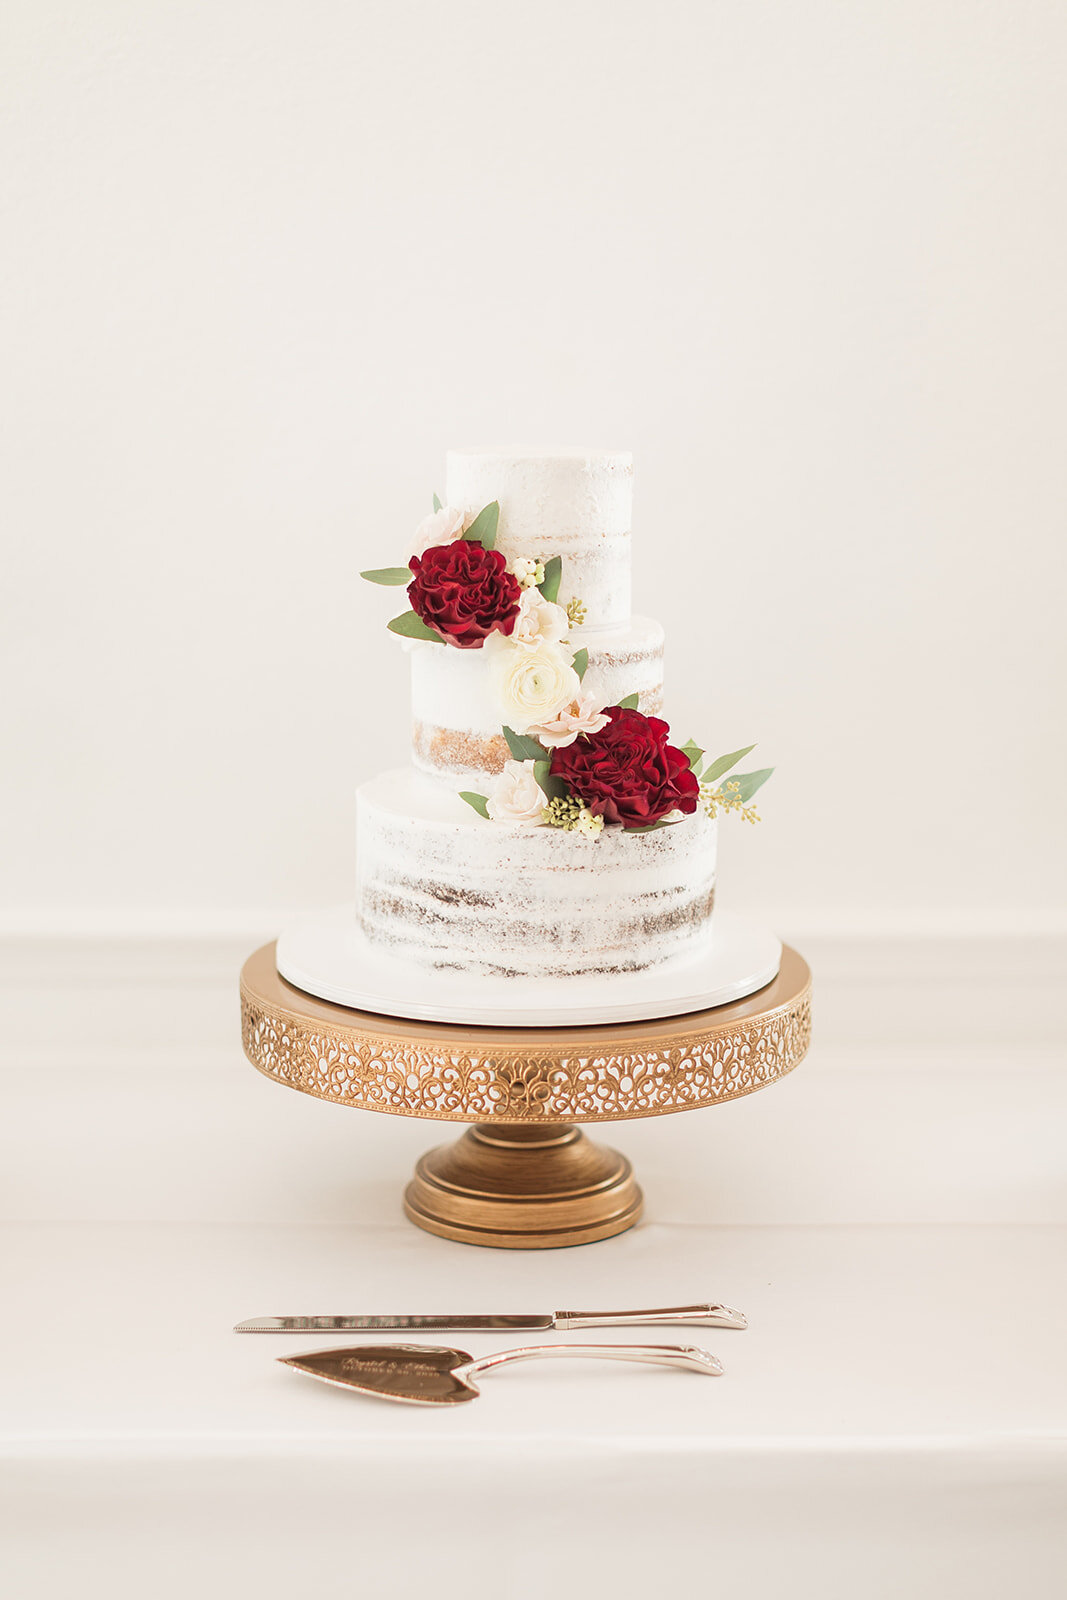 Bluegrass Chic - The Hendricks Photography at Royal Crest Room splash of color on this beautiful cake